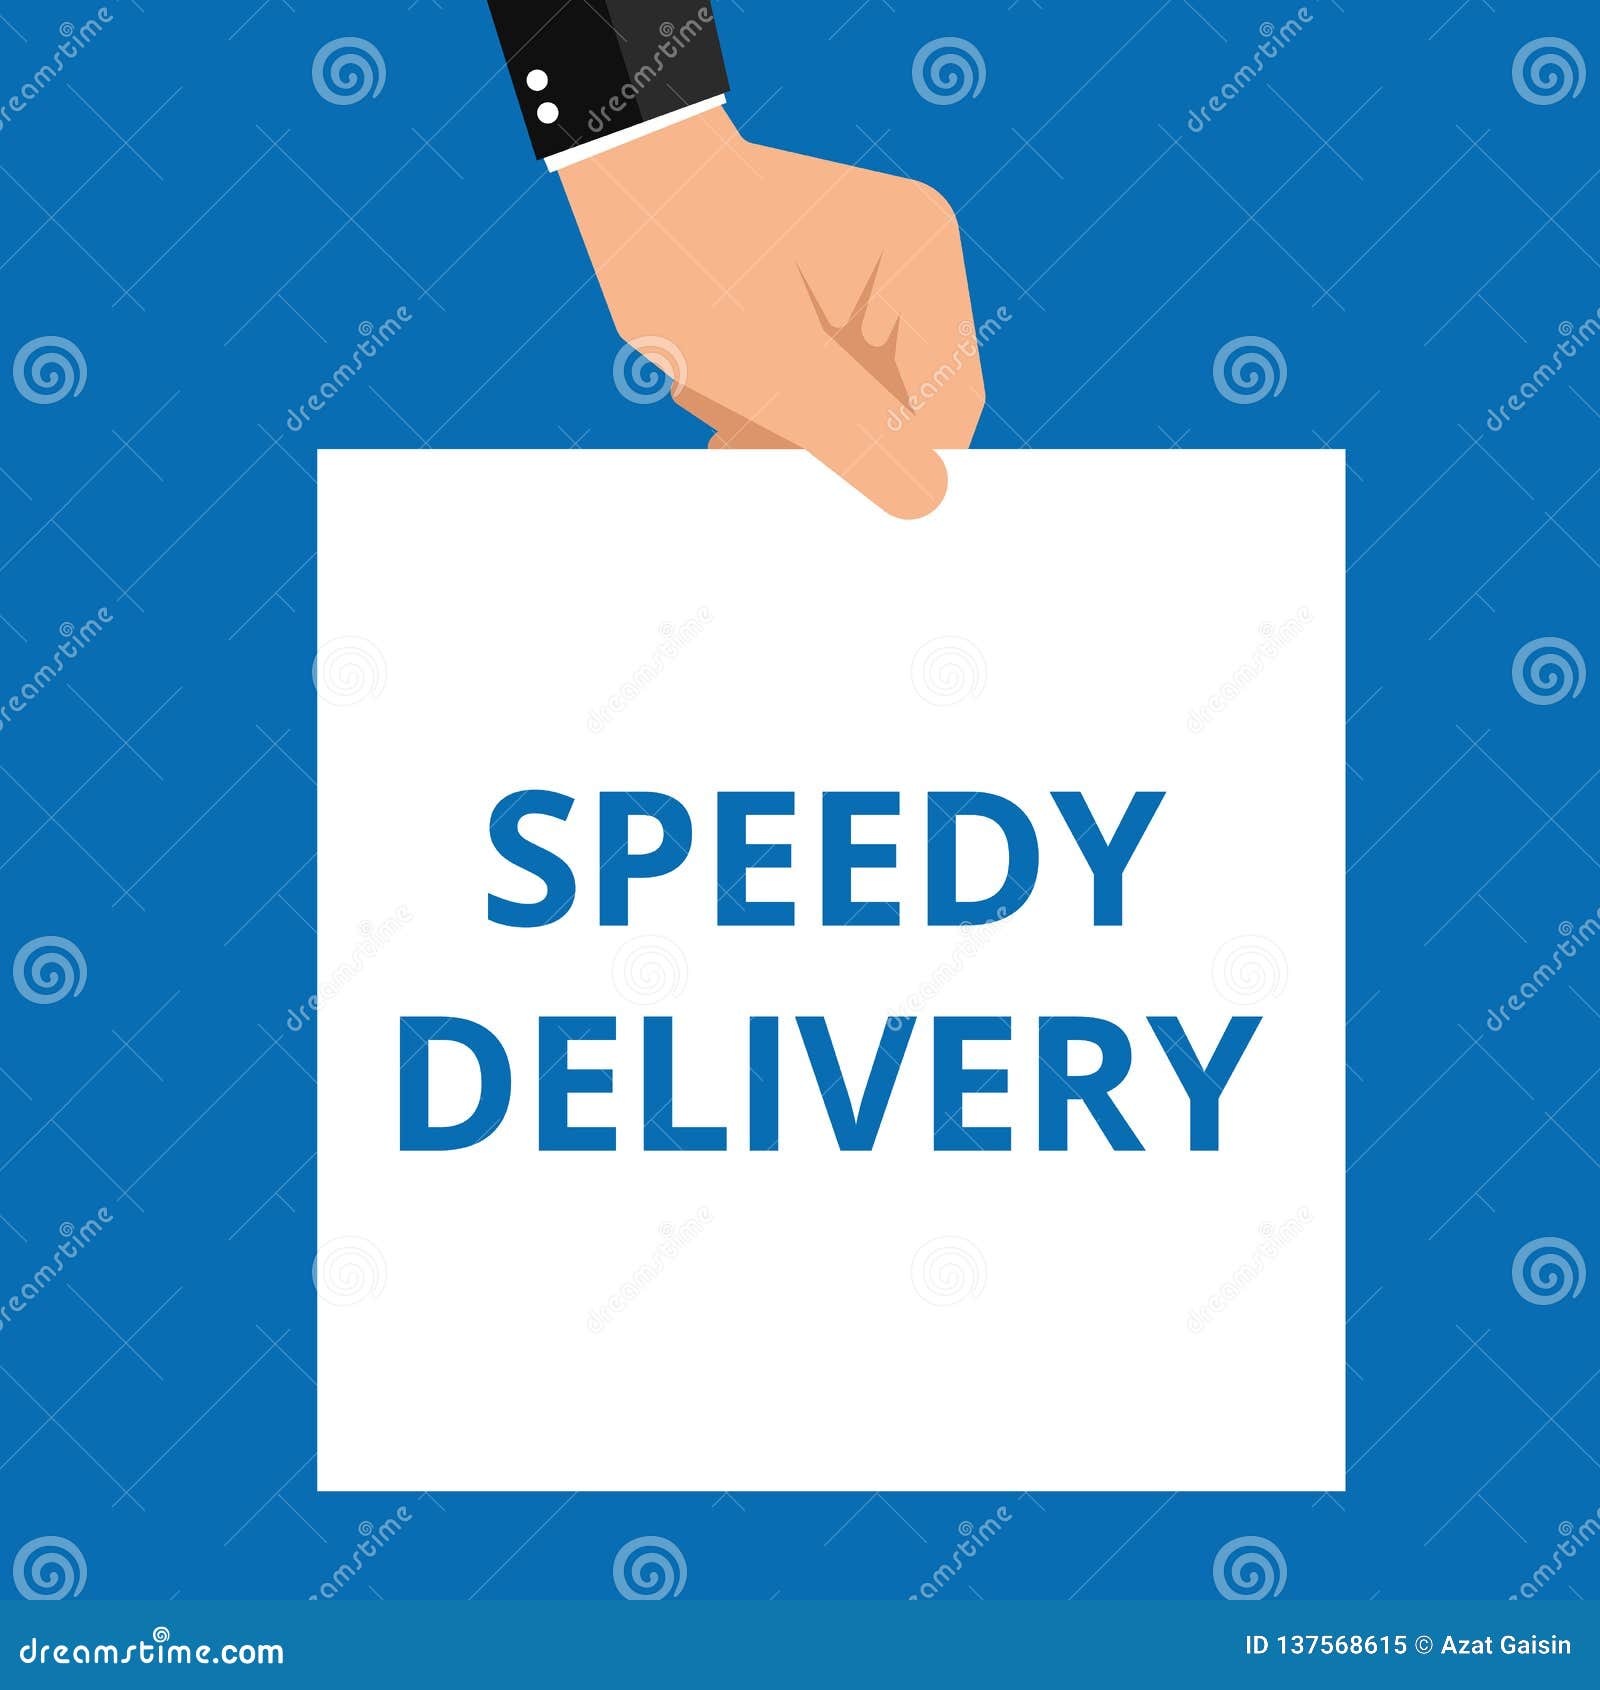 Text Sign Showing Speedy Delivery Stock Illustration - Illustration of move, freight: 137568615